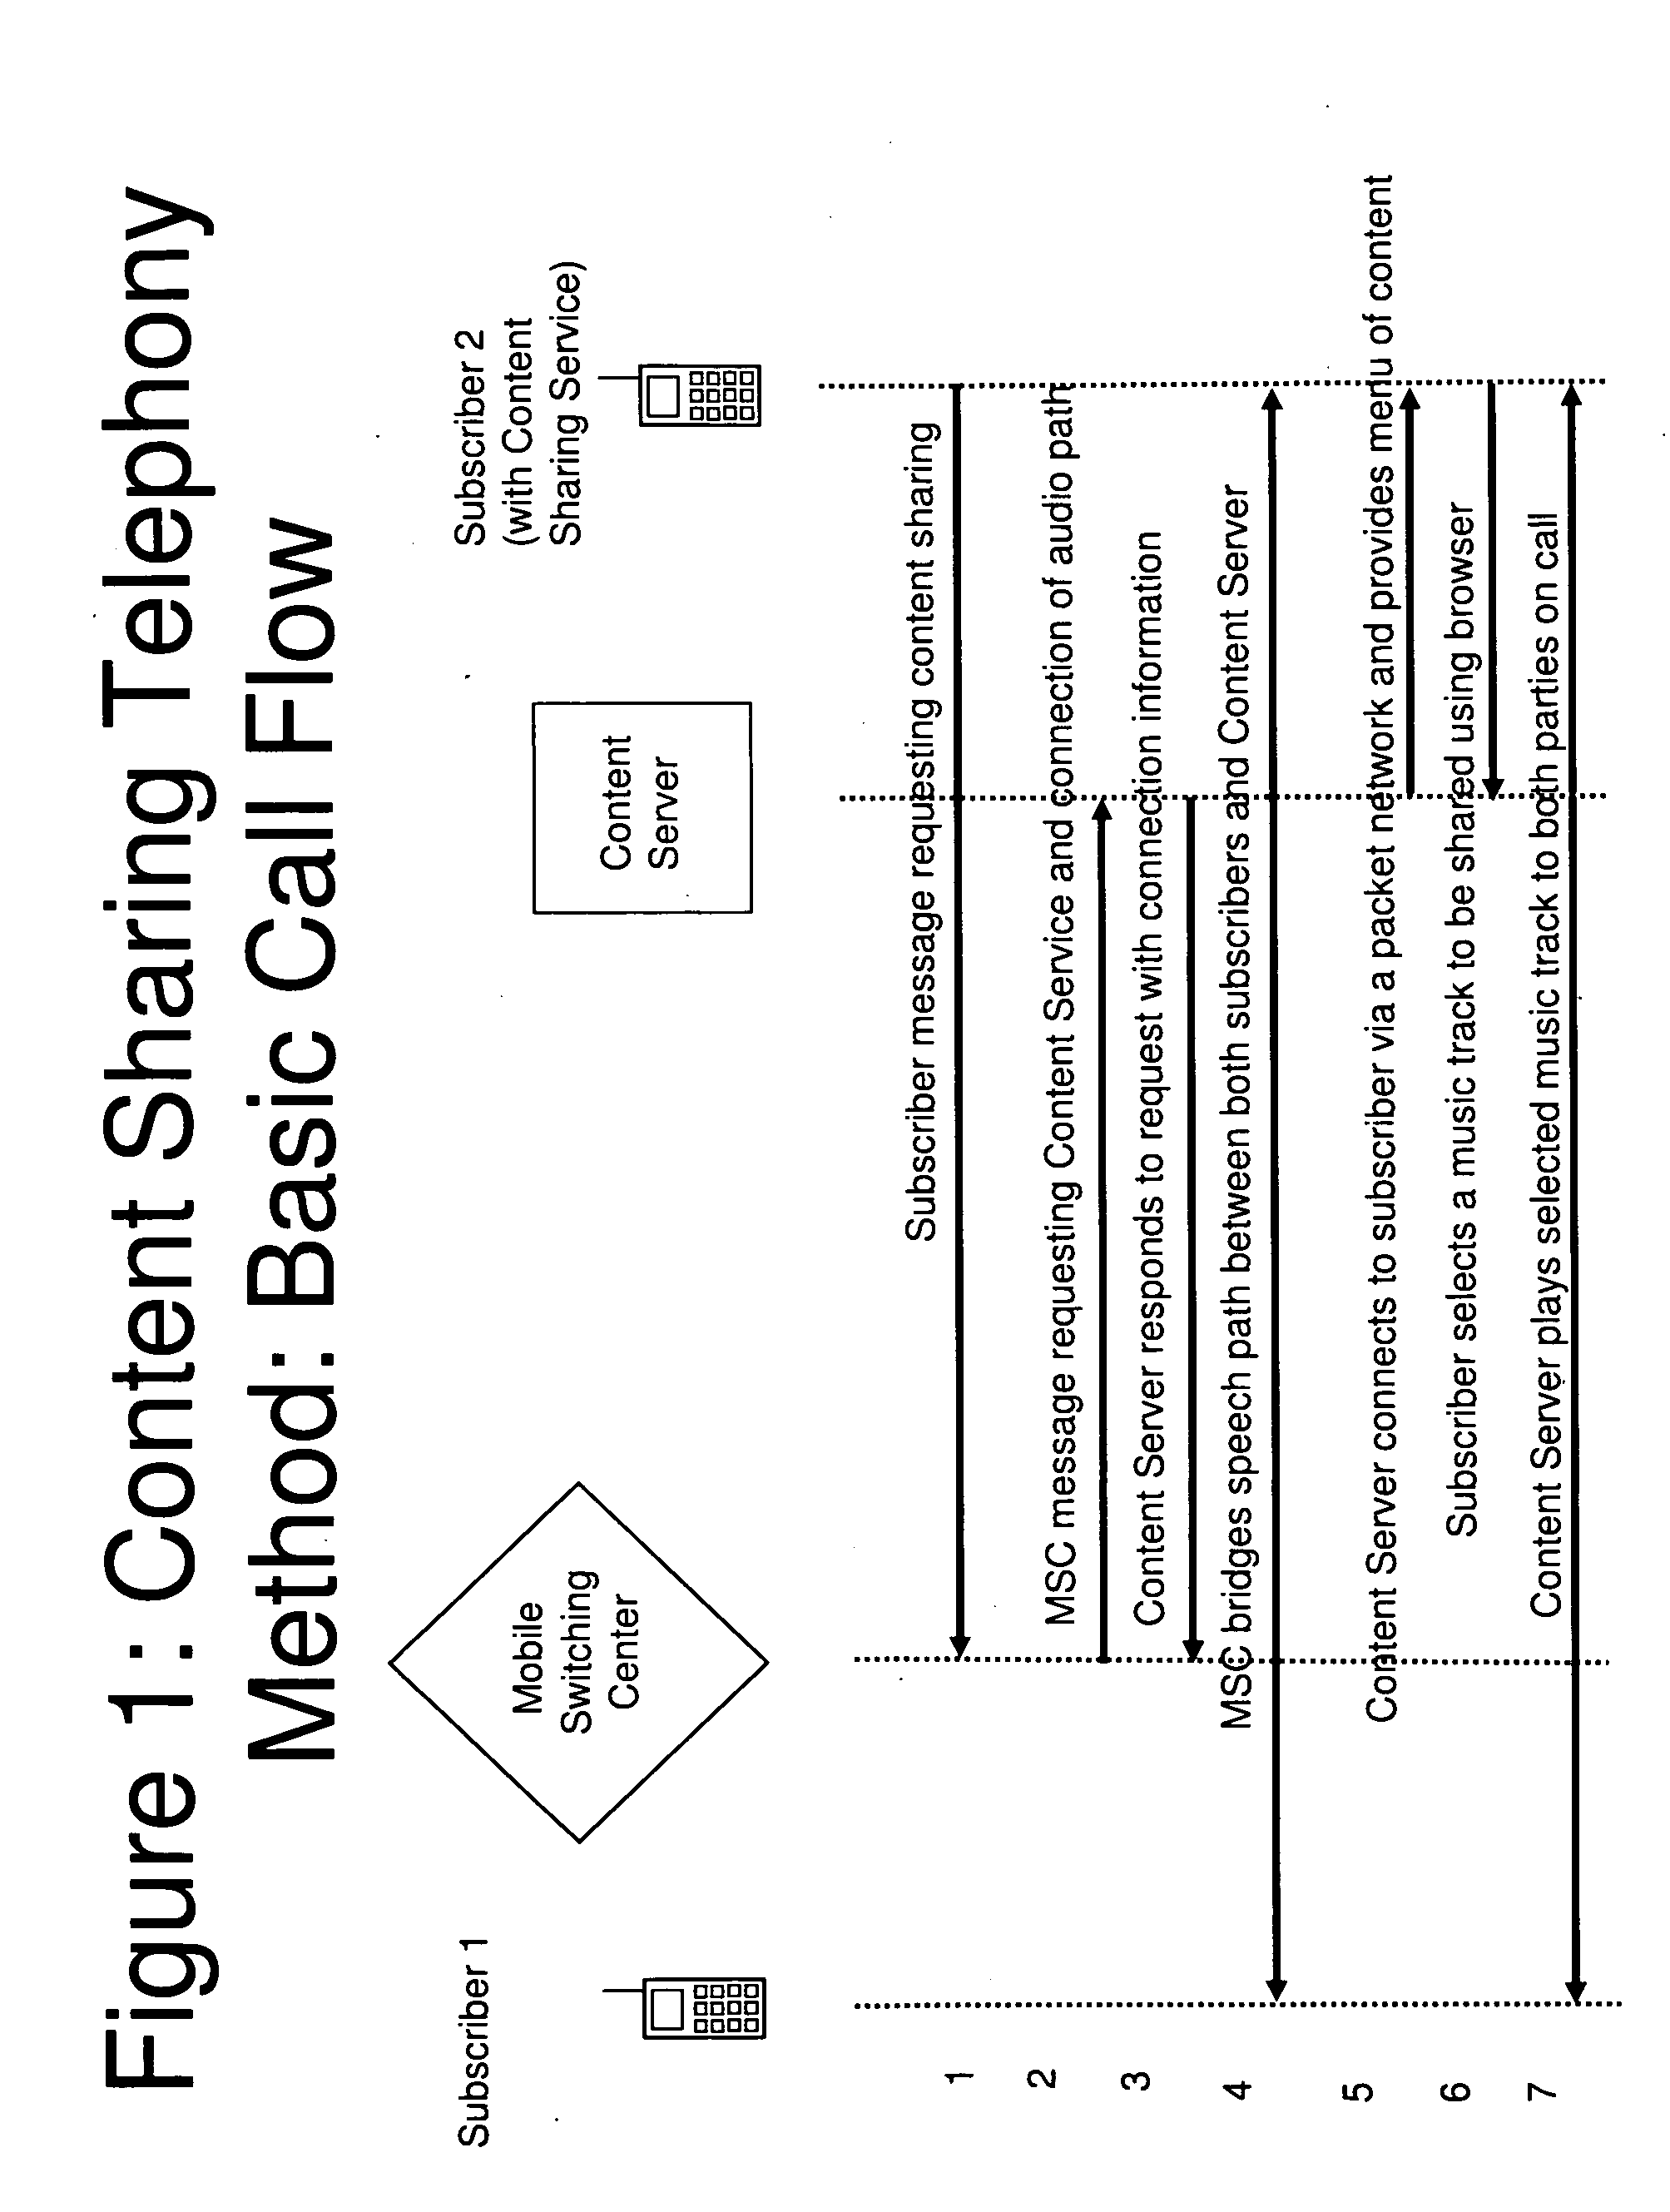 Method for Sharing Audio-only content, Audio-Visual content, and Visual-only content between Subscribers on a Telephone call